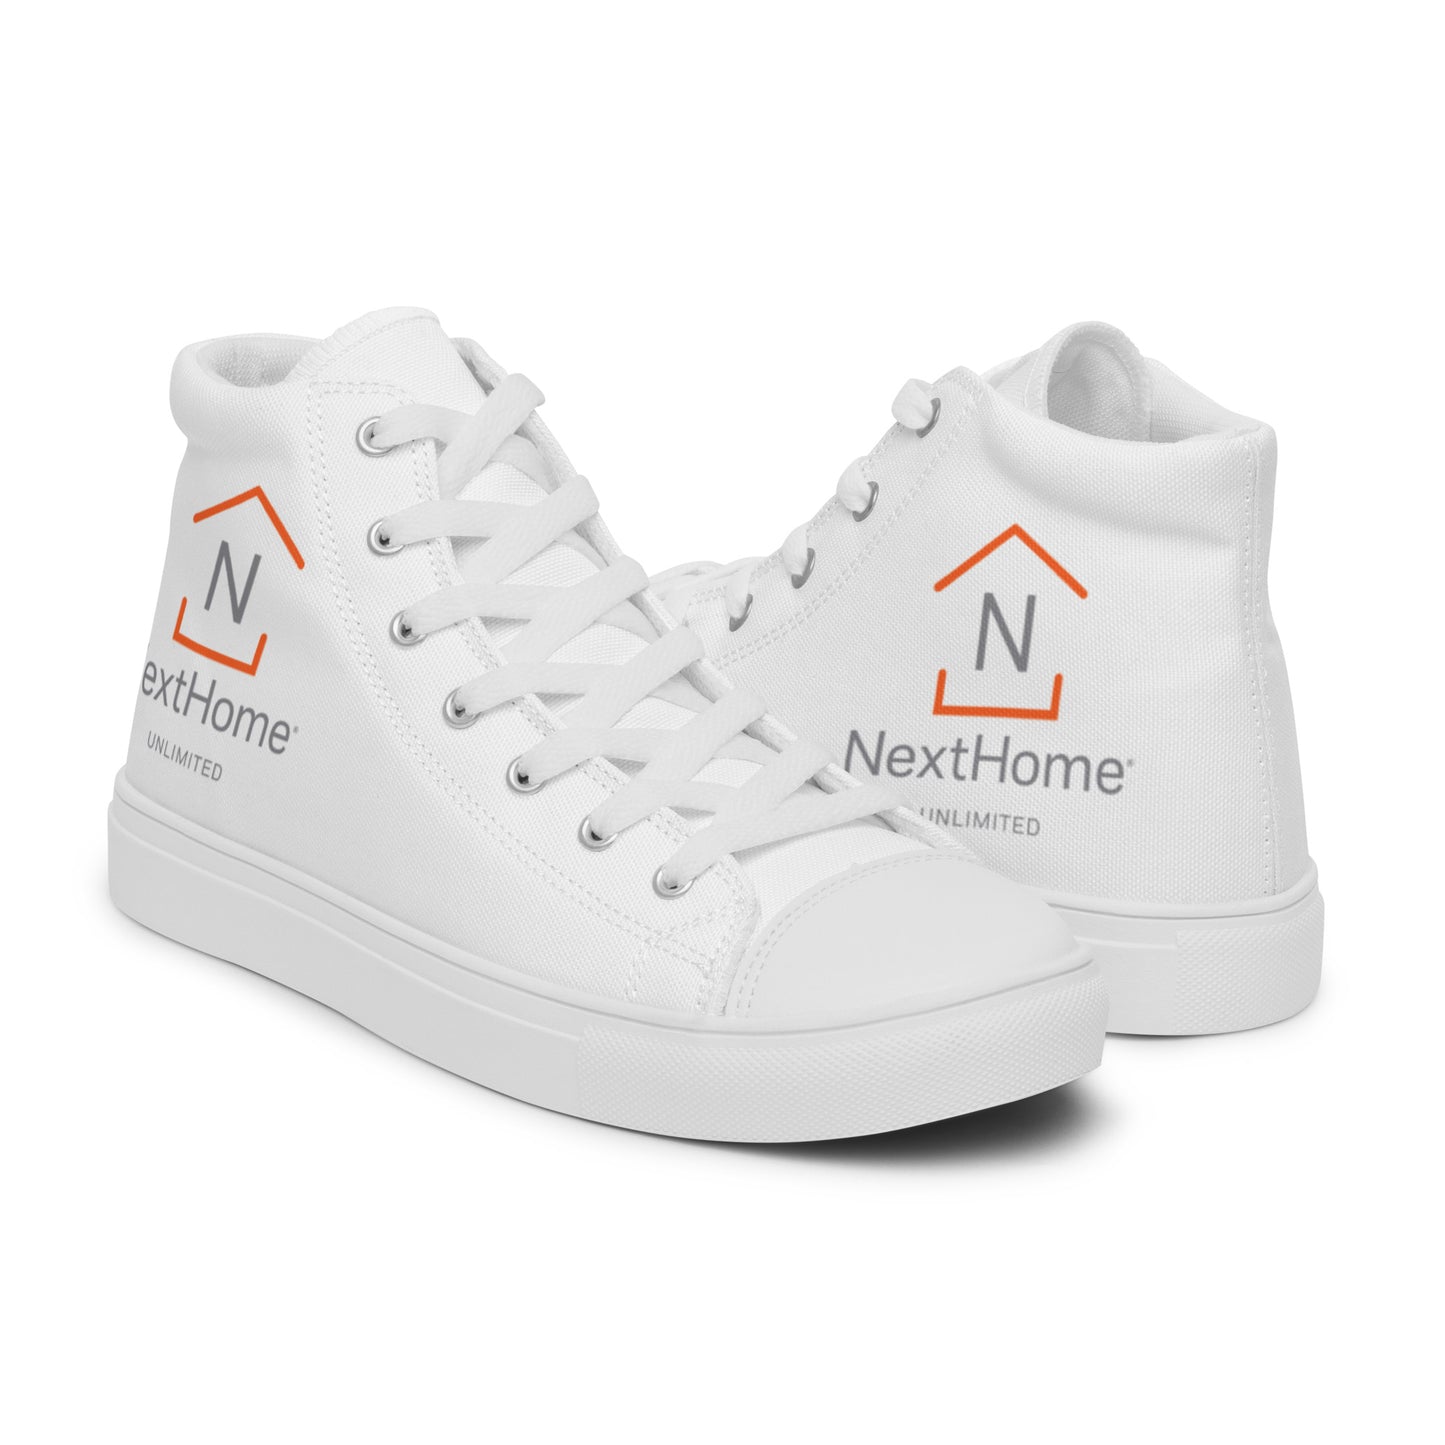 NextHome Unlimited Women’s high top canvas shoes